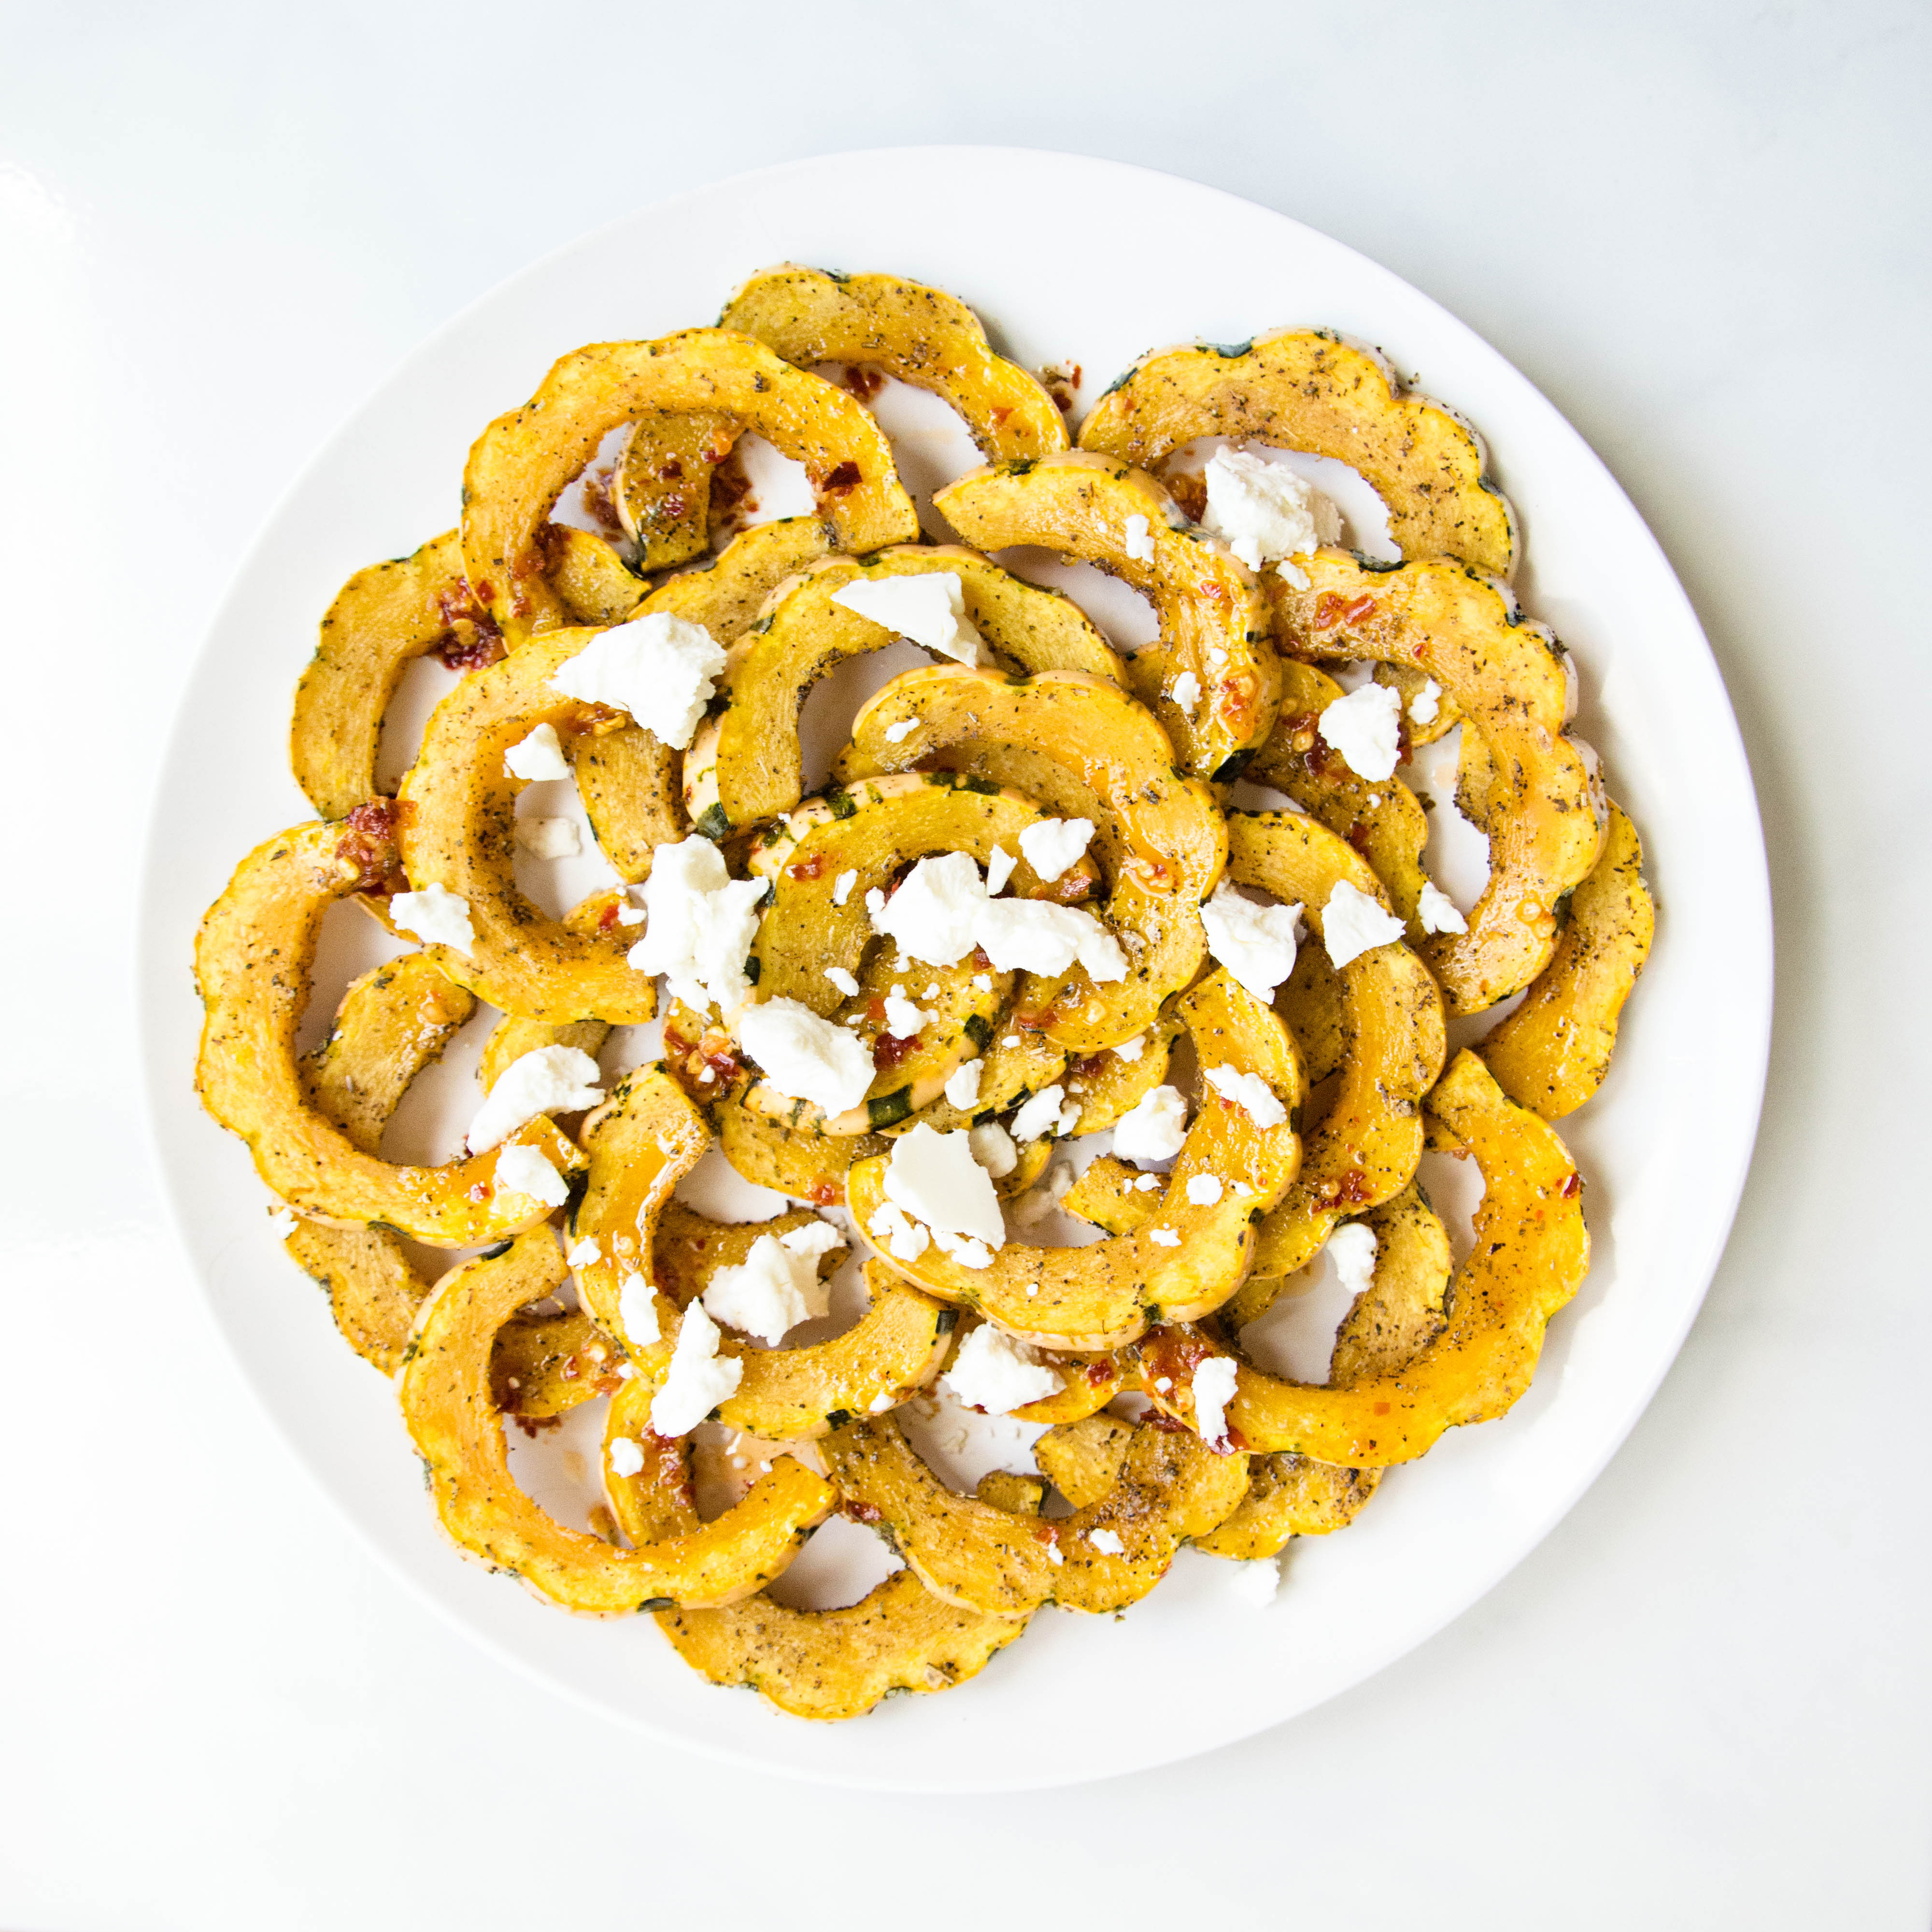 Roasted Squash with Chili Oil and Goat Cheese